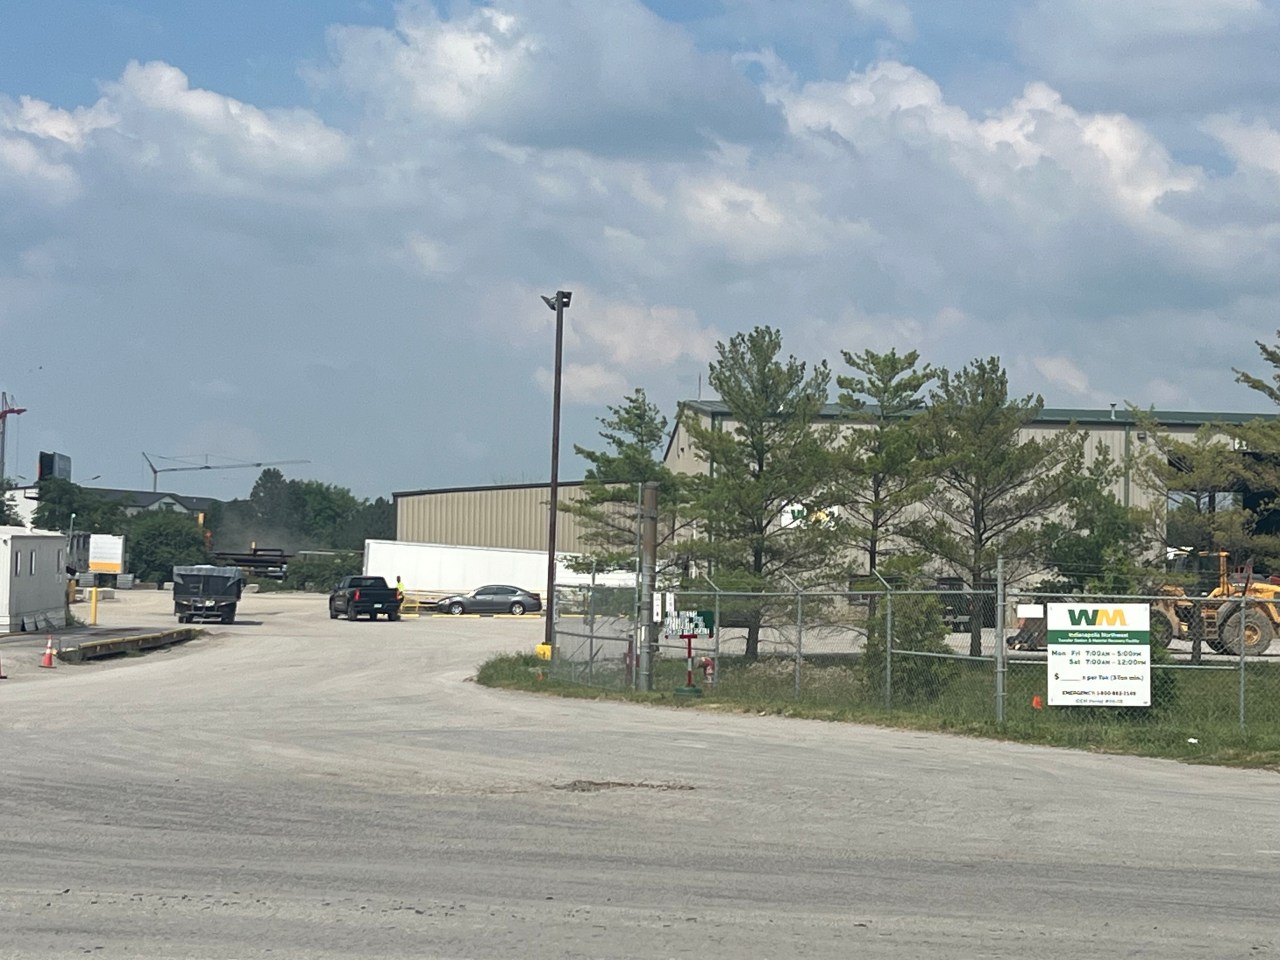 Worker dies at Waste Management in Whitestown for second time [Video]